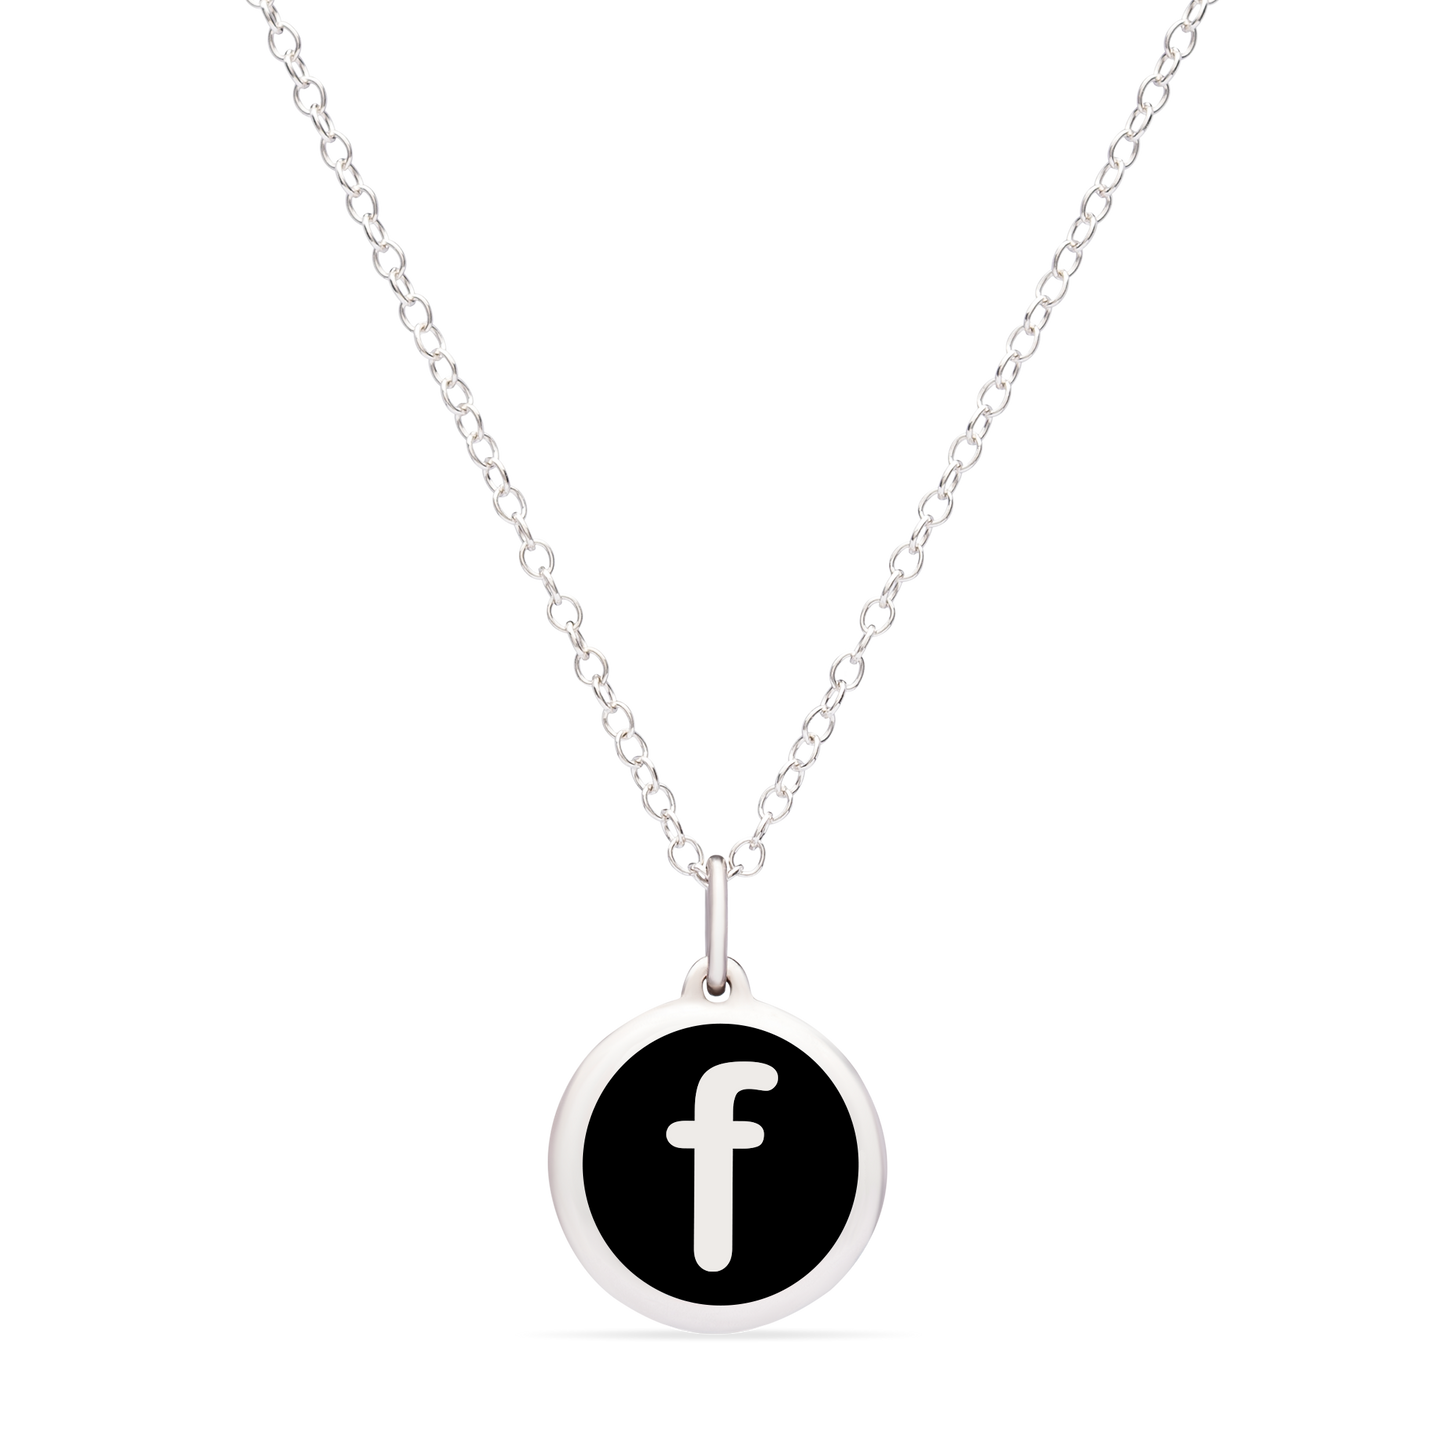 MINI INITIAL 'f' CHARM sterling silver with rhodium plate